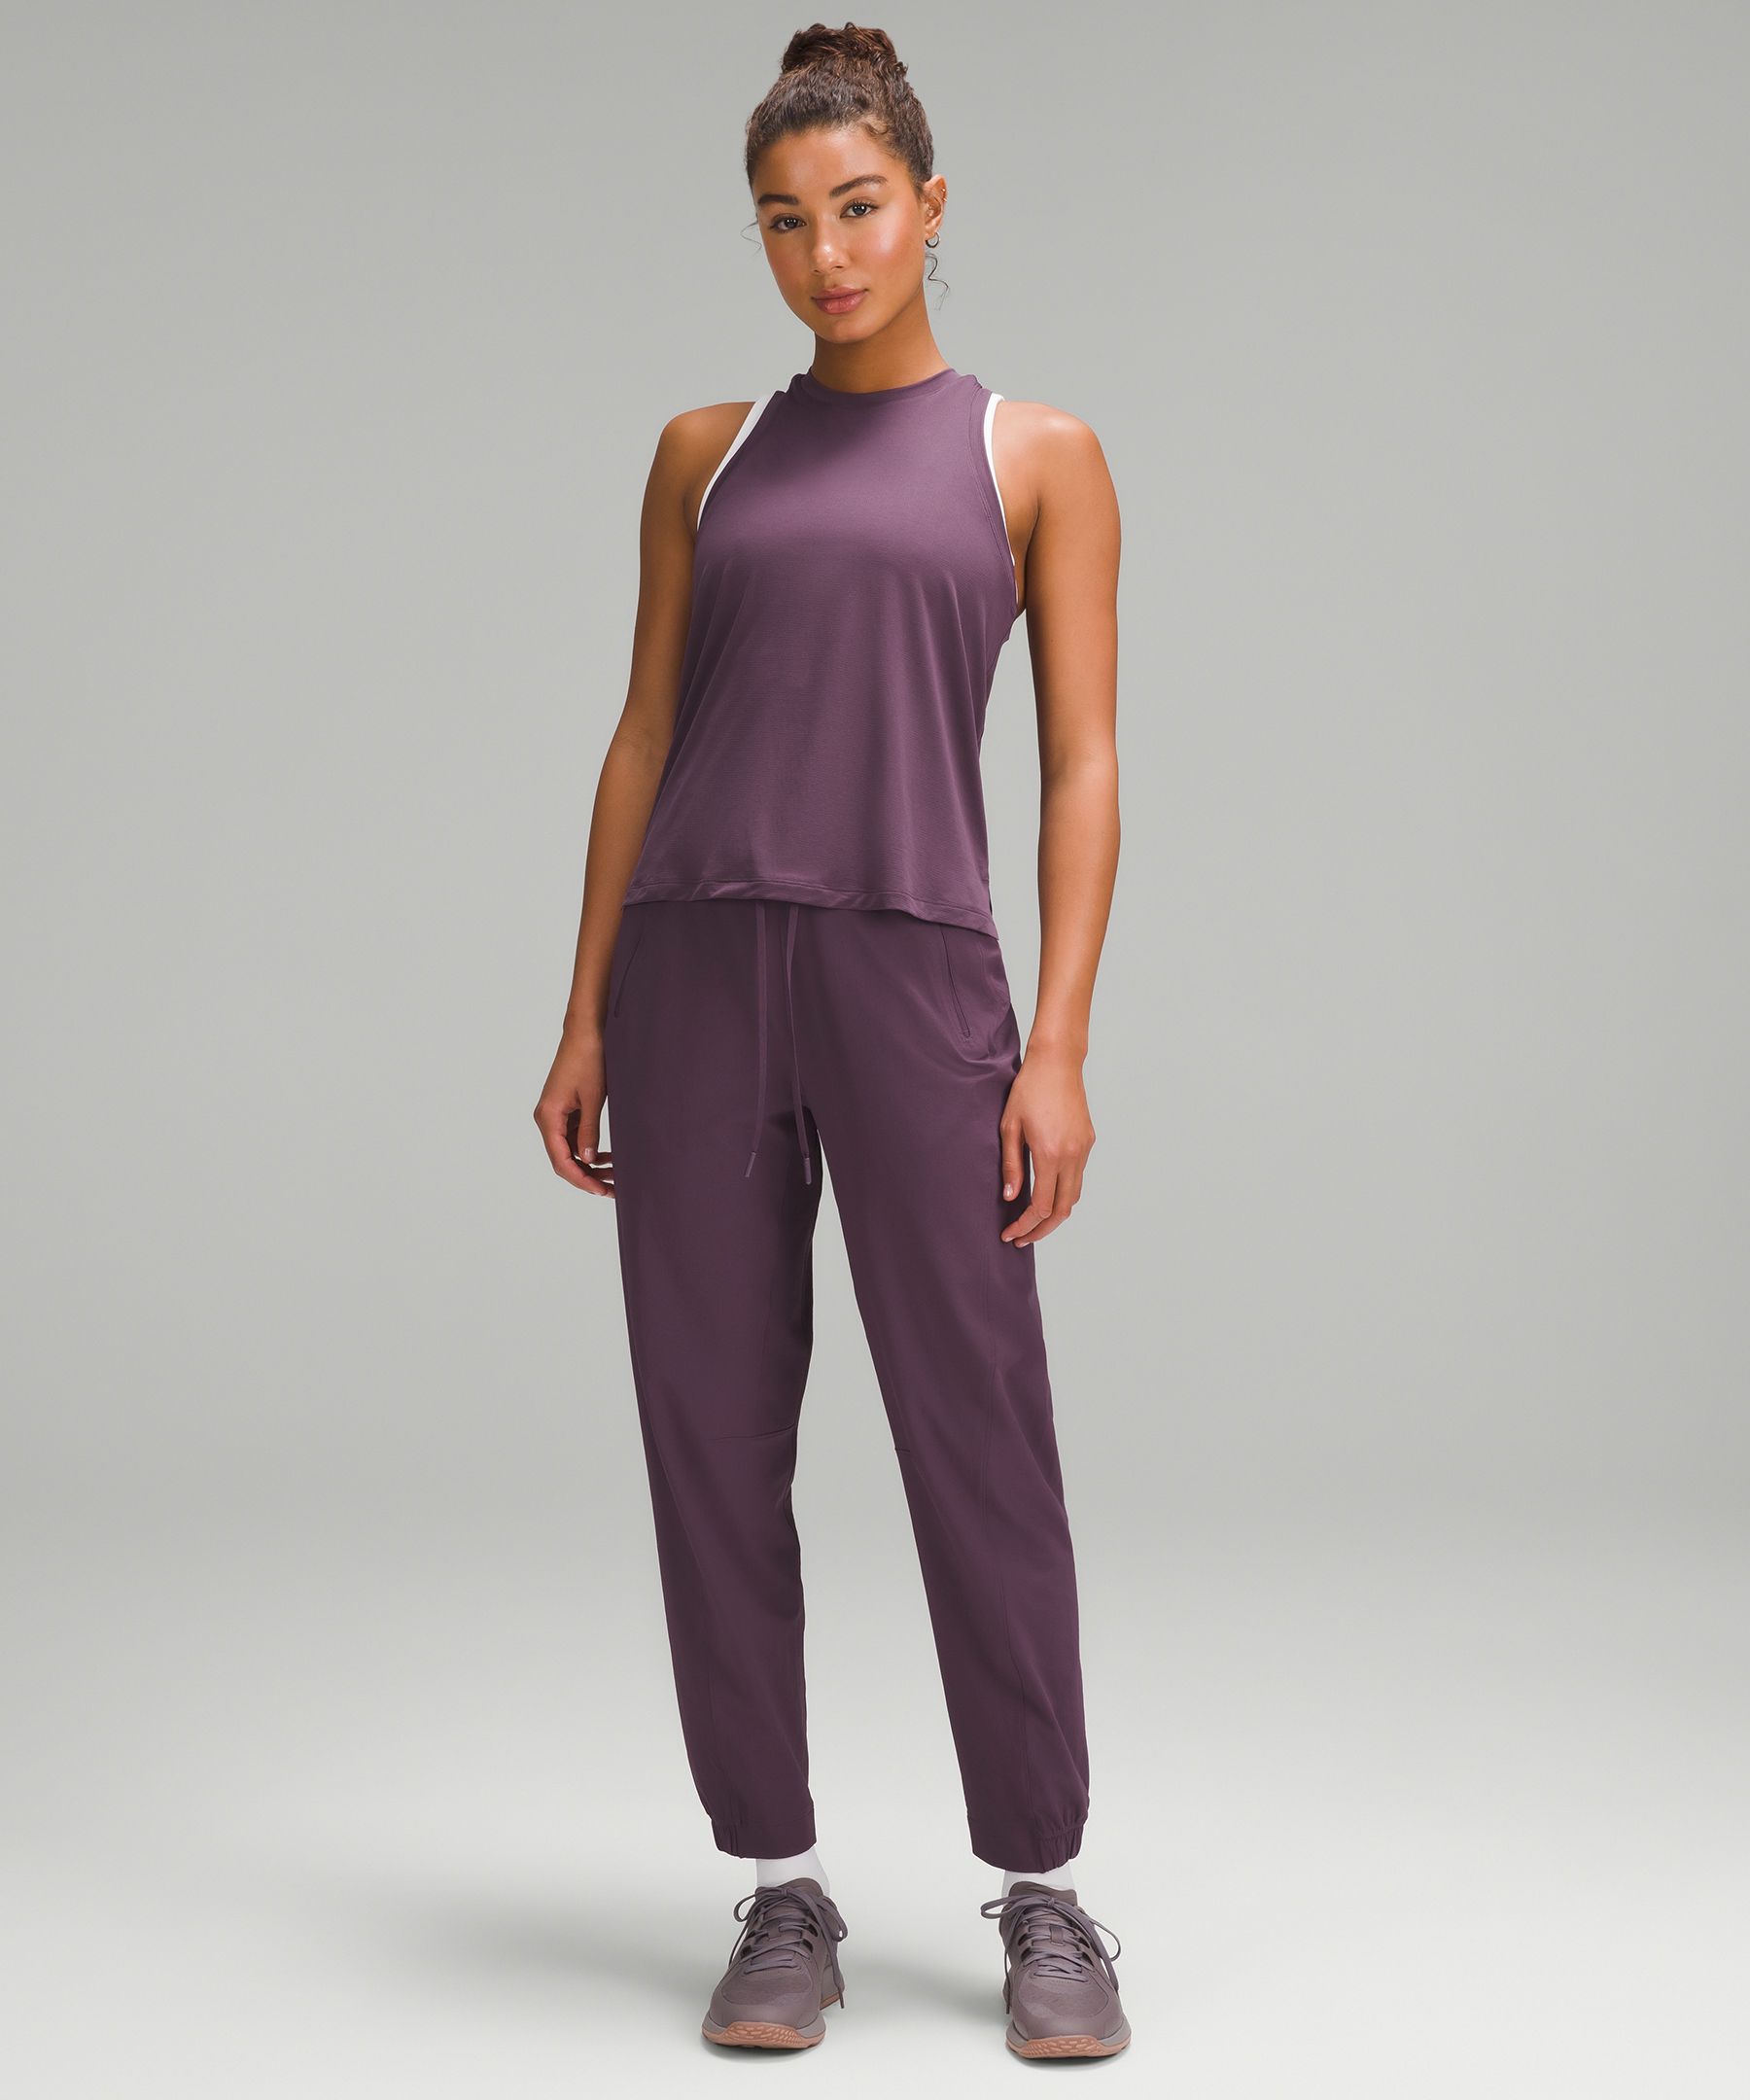 lululemon  Driveline - Recovery Collection: License to Train